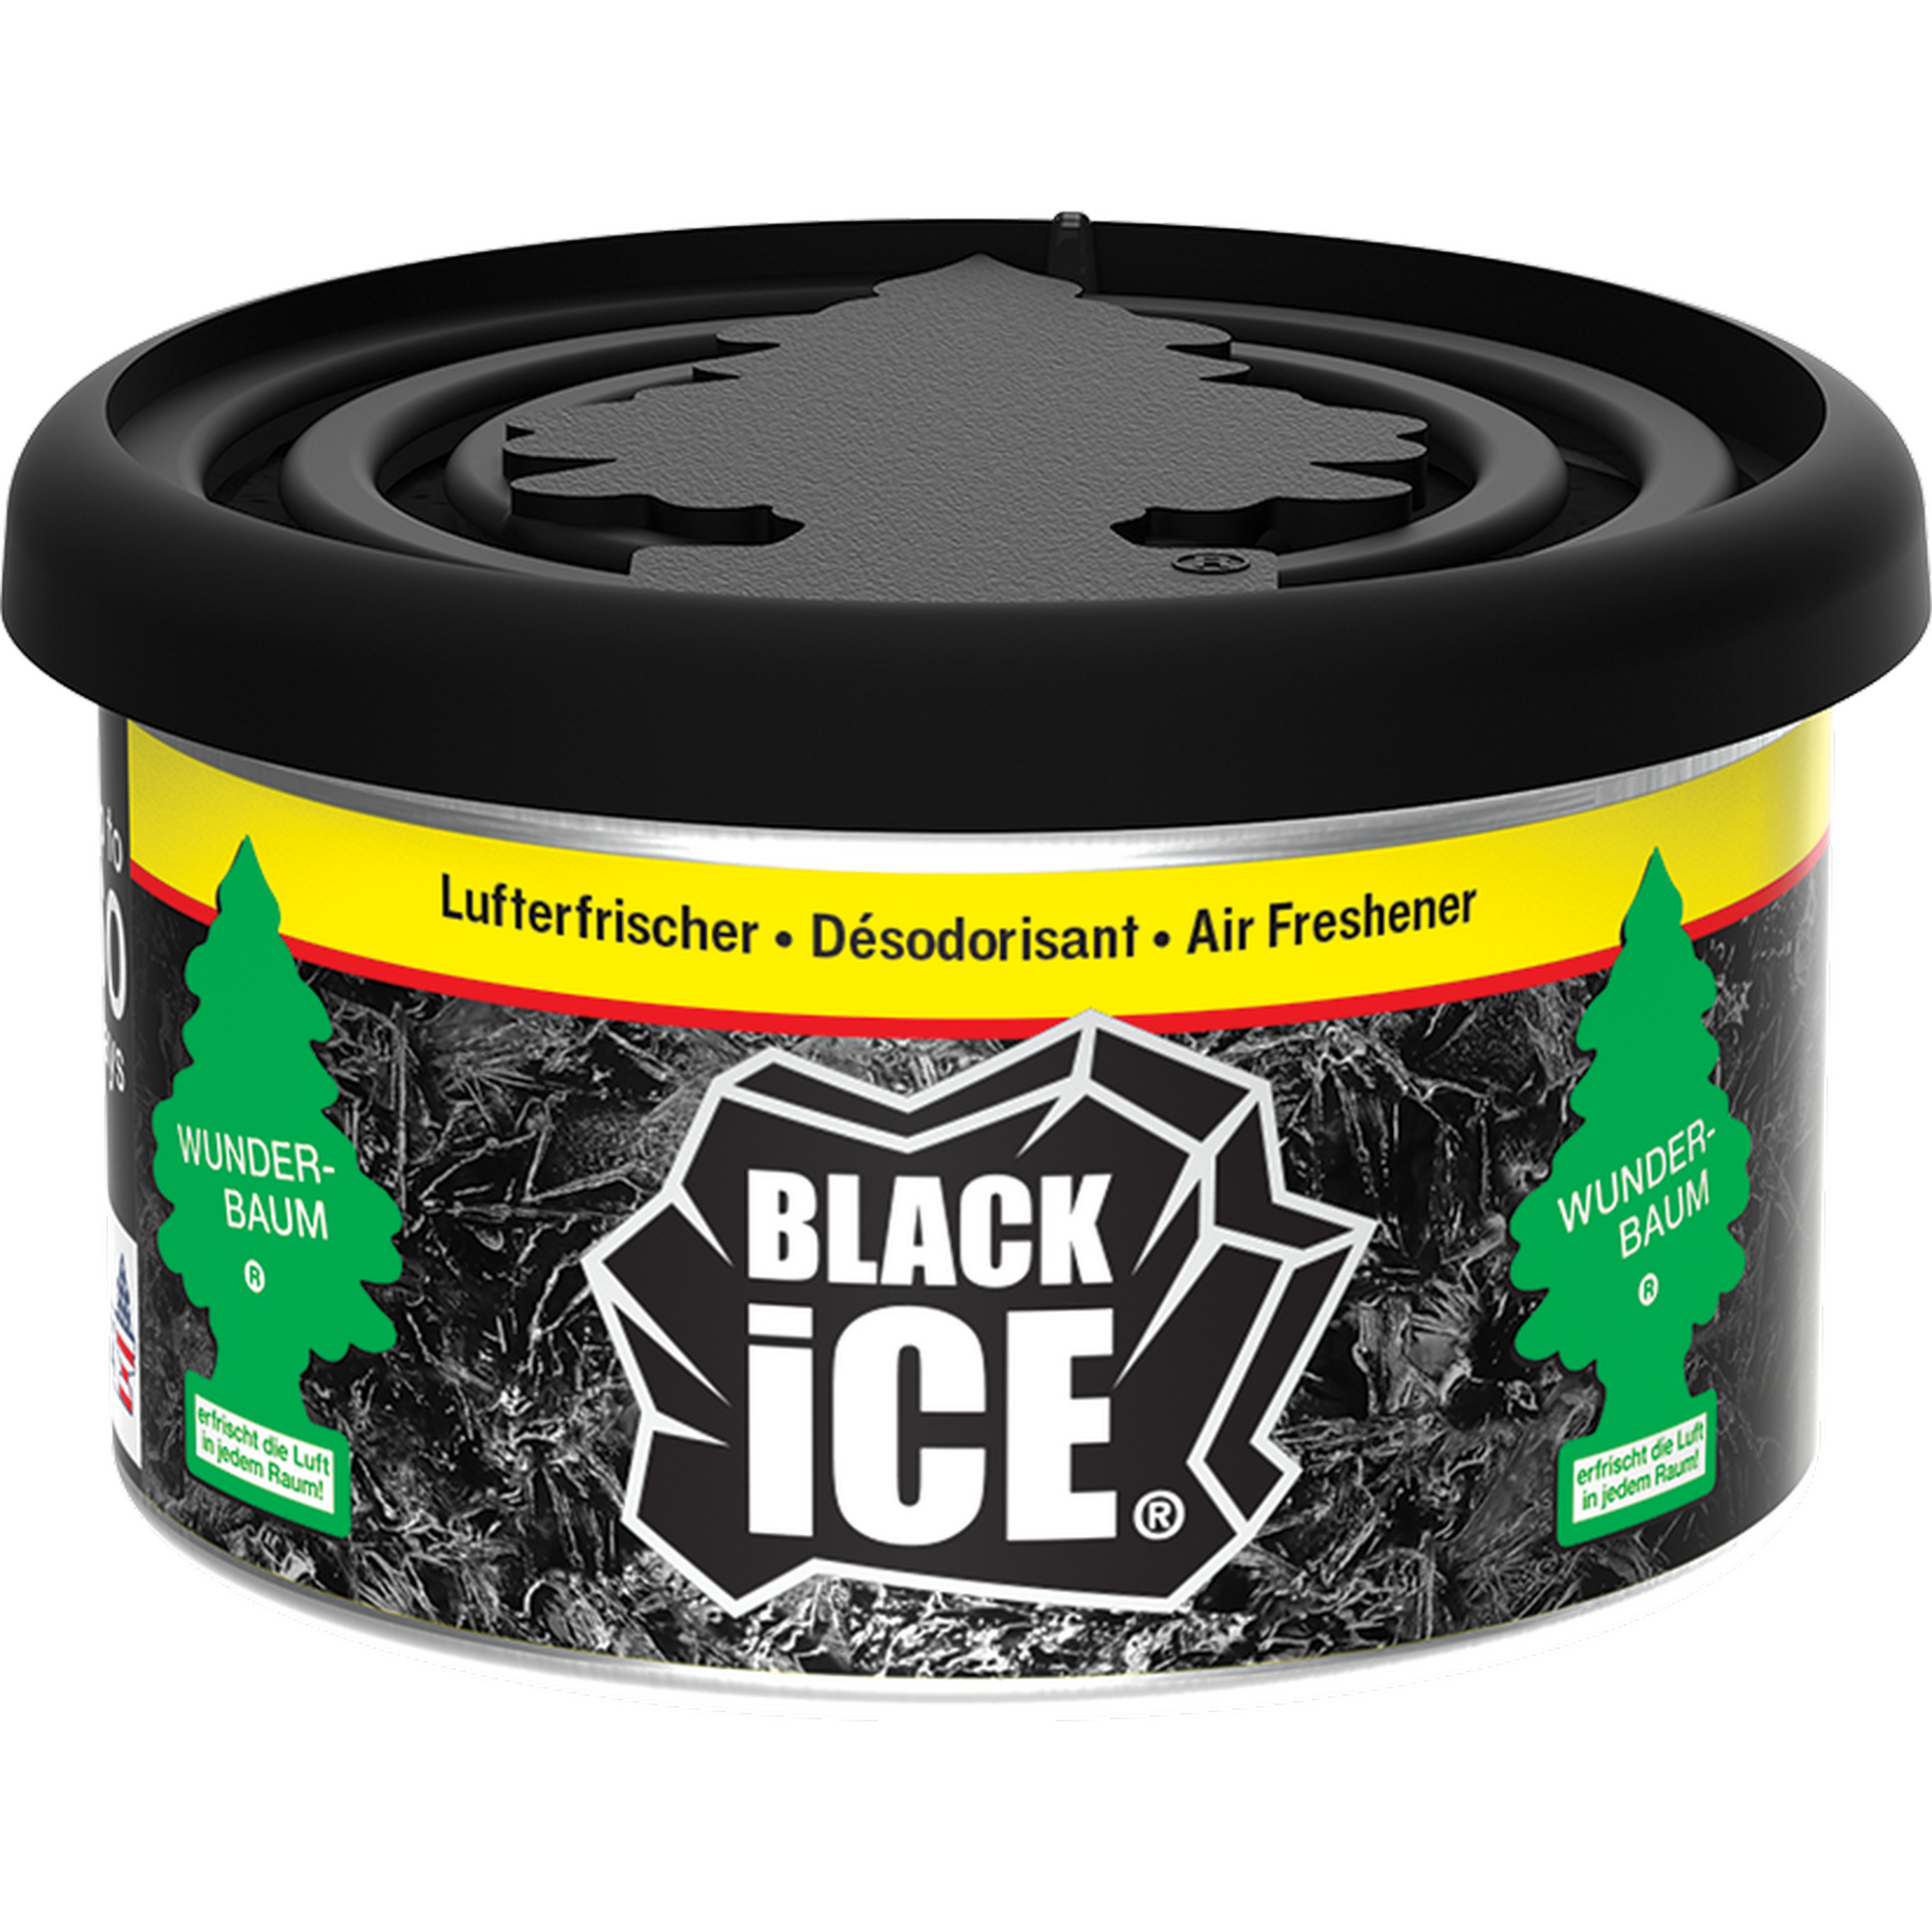 Lufterfrischer-Dose 'Black Ice' + product picture